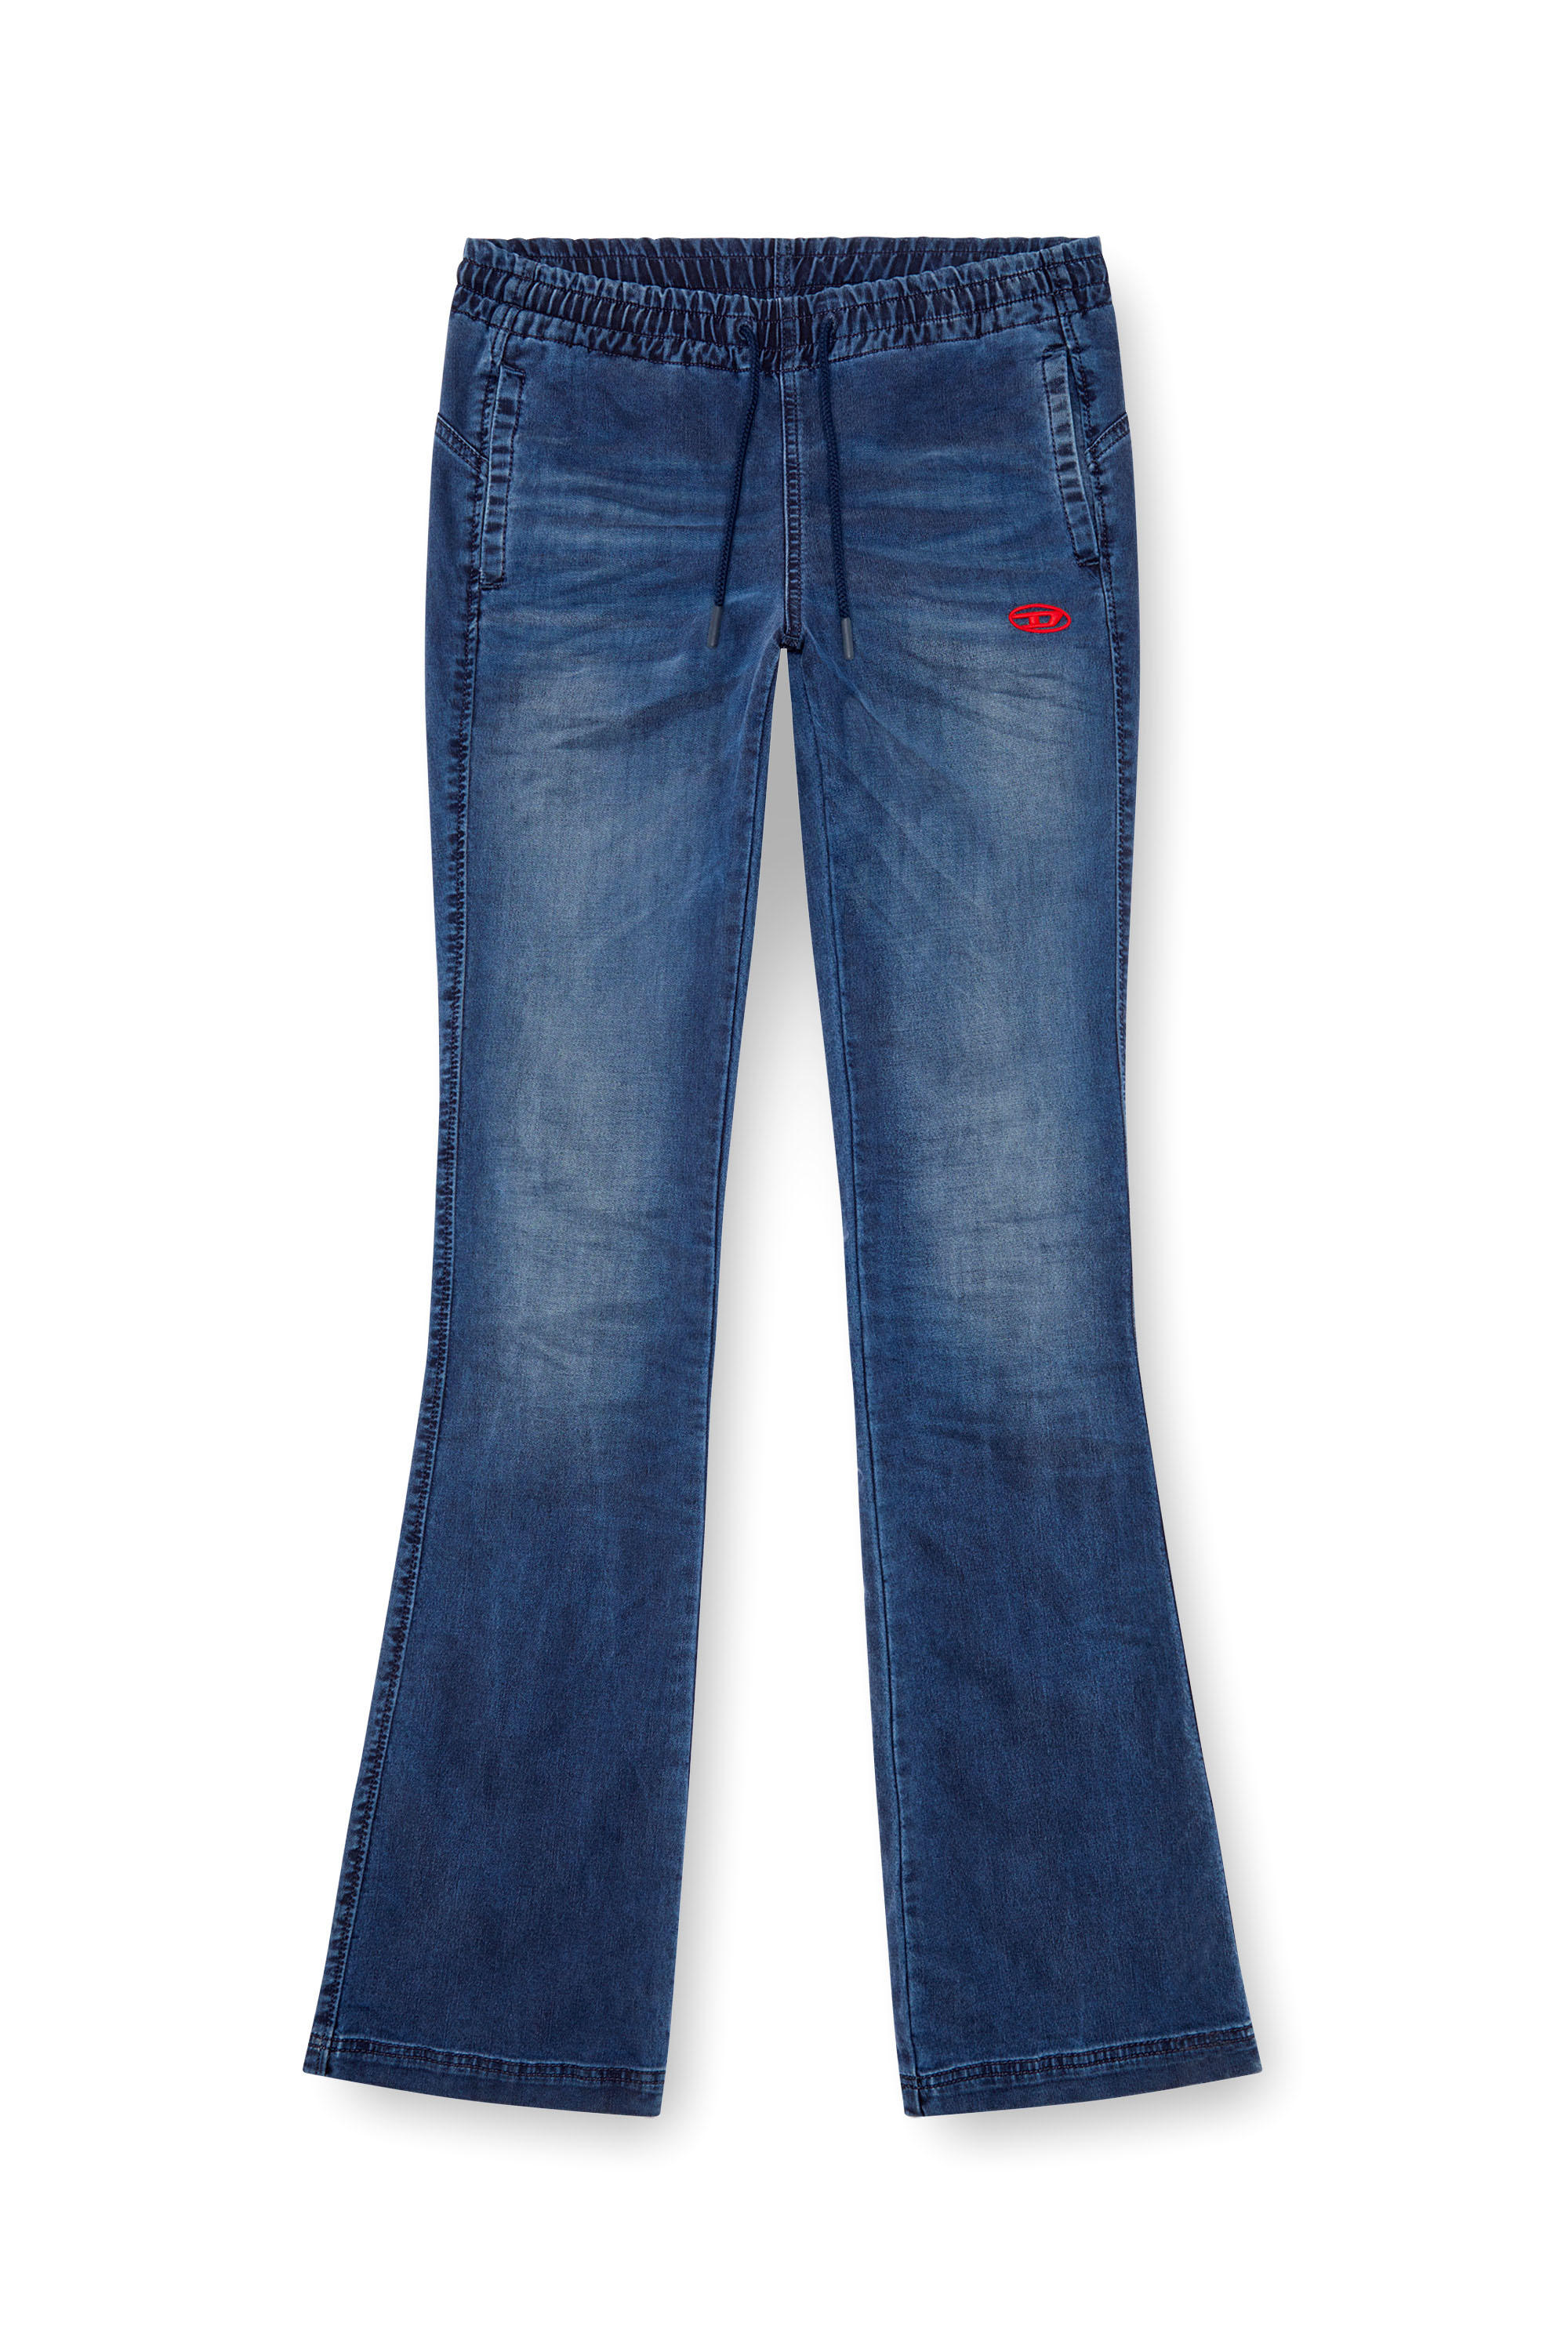 Diesel - Bootcut and Flare 2069 D-Ebbey Joggjeans® 068LX, Mujer Bootcut y Flare 2069 D-Ebbey Joggjeans® in Azul marino - Image 5